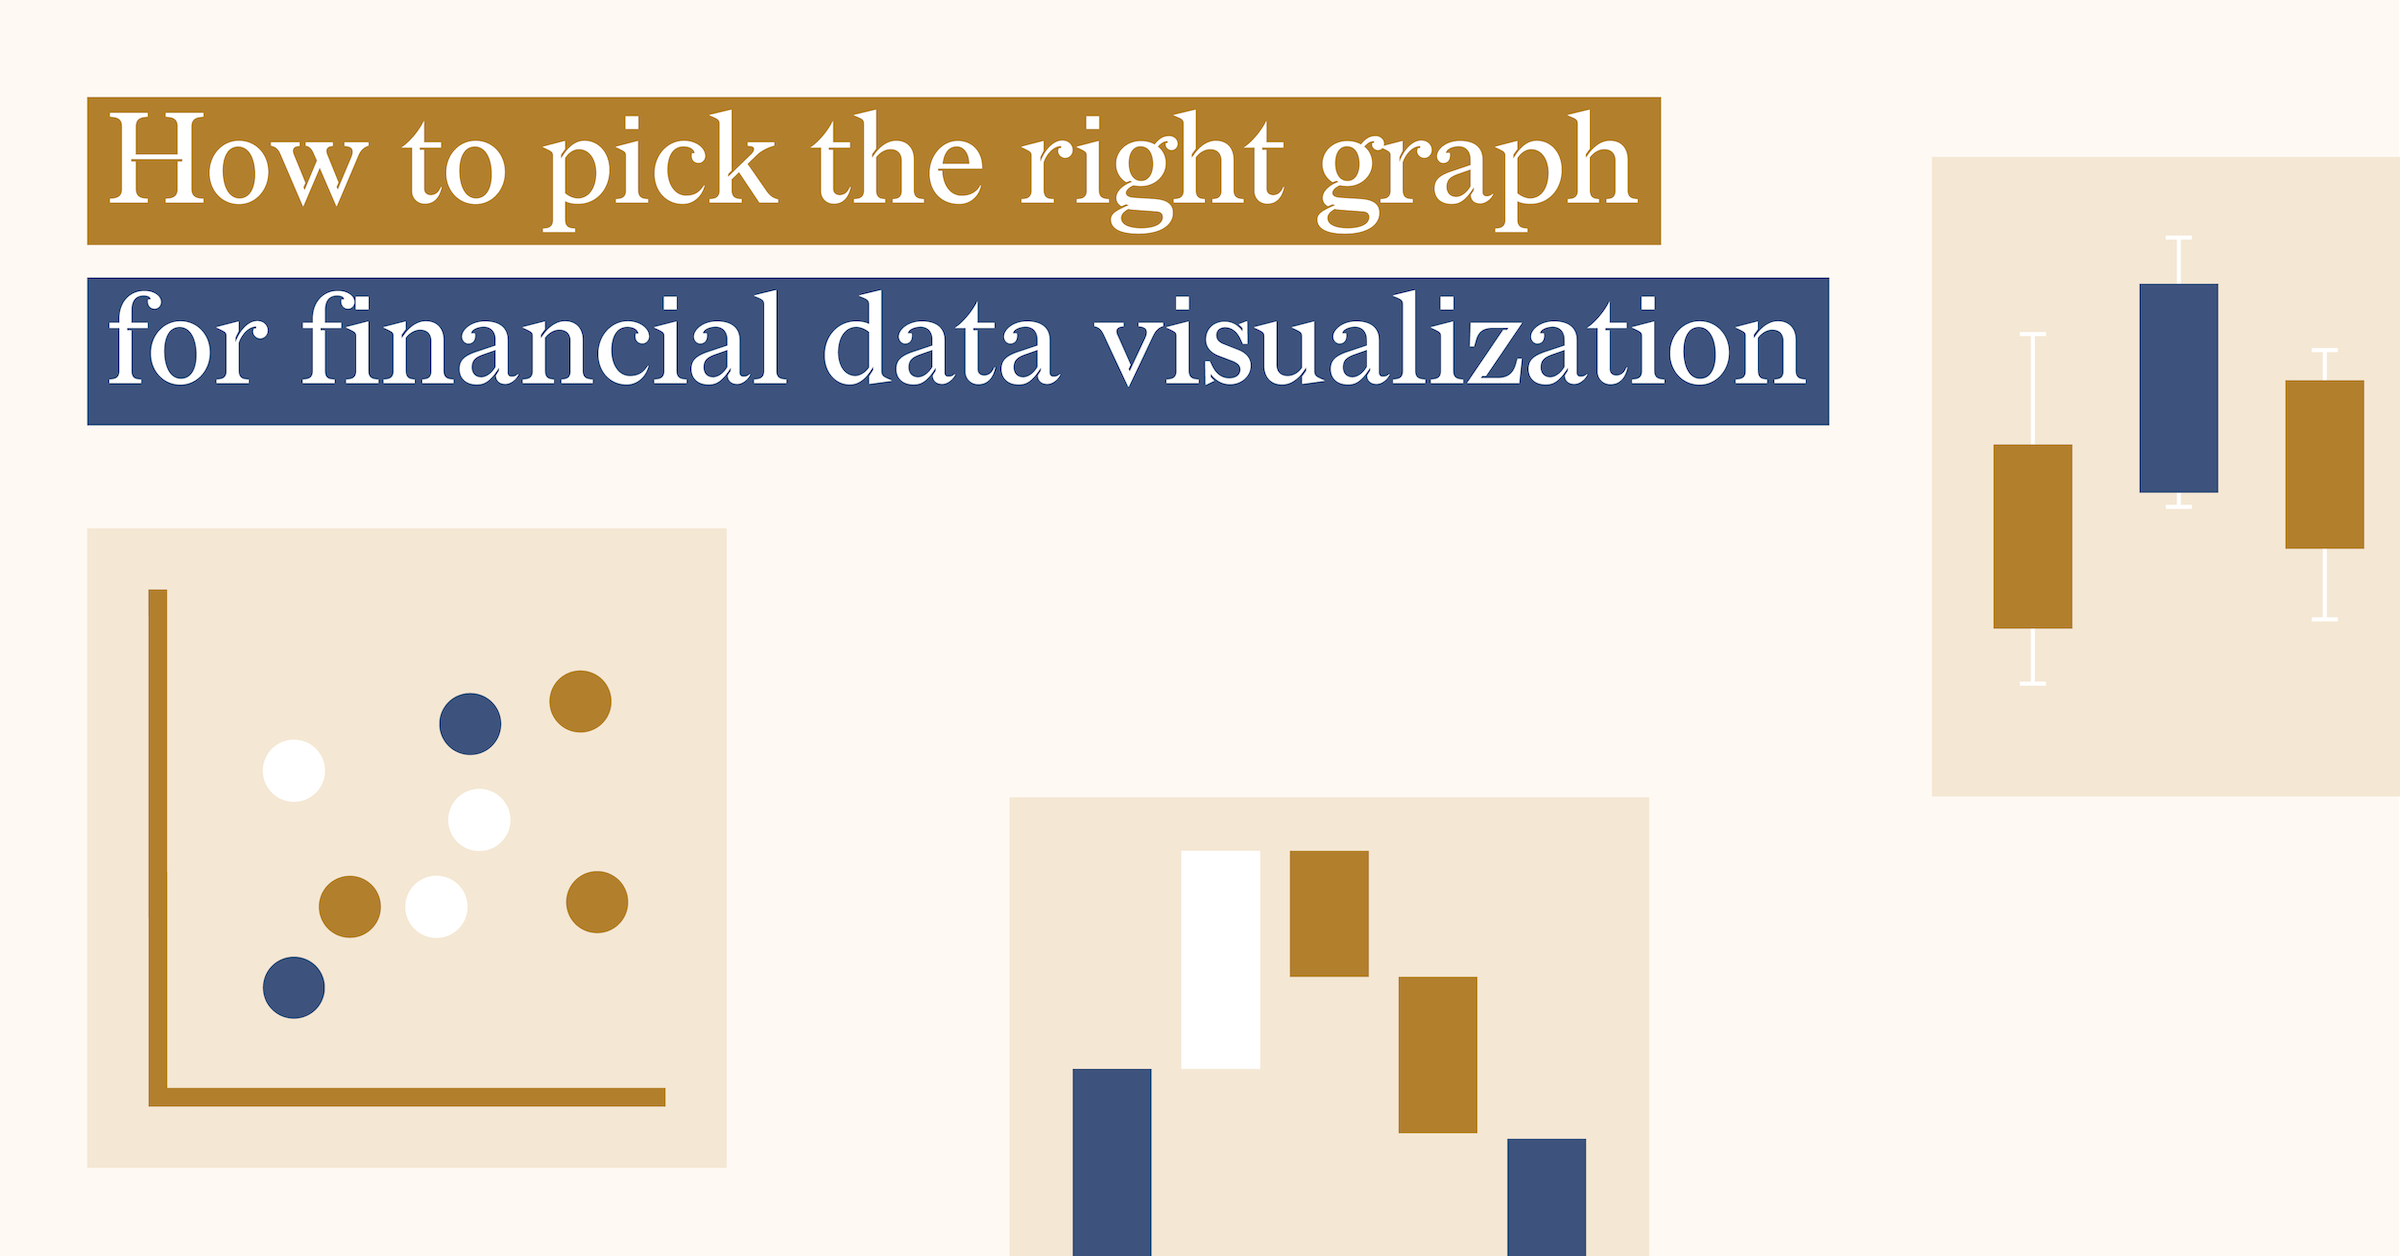 A feature image for an article how to pick the right graph for financial data visualization showing scatter graph, waterfall chart and boxplot